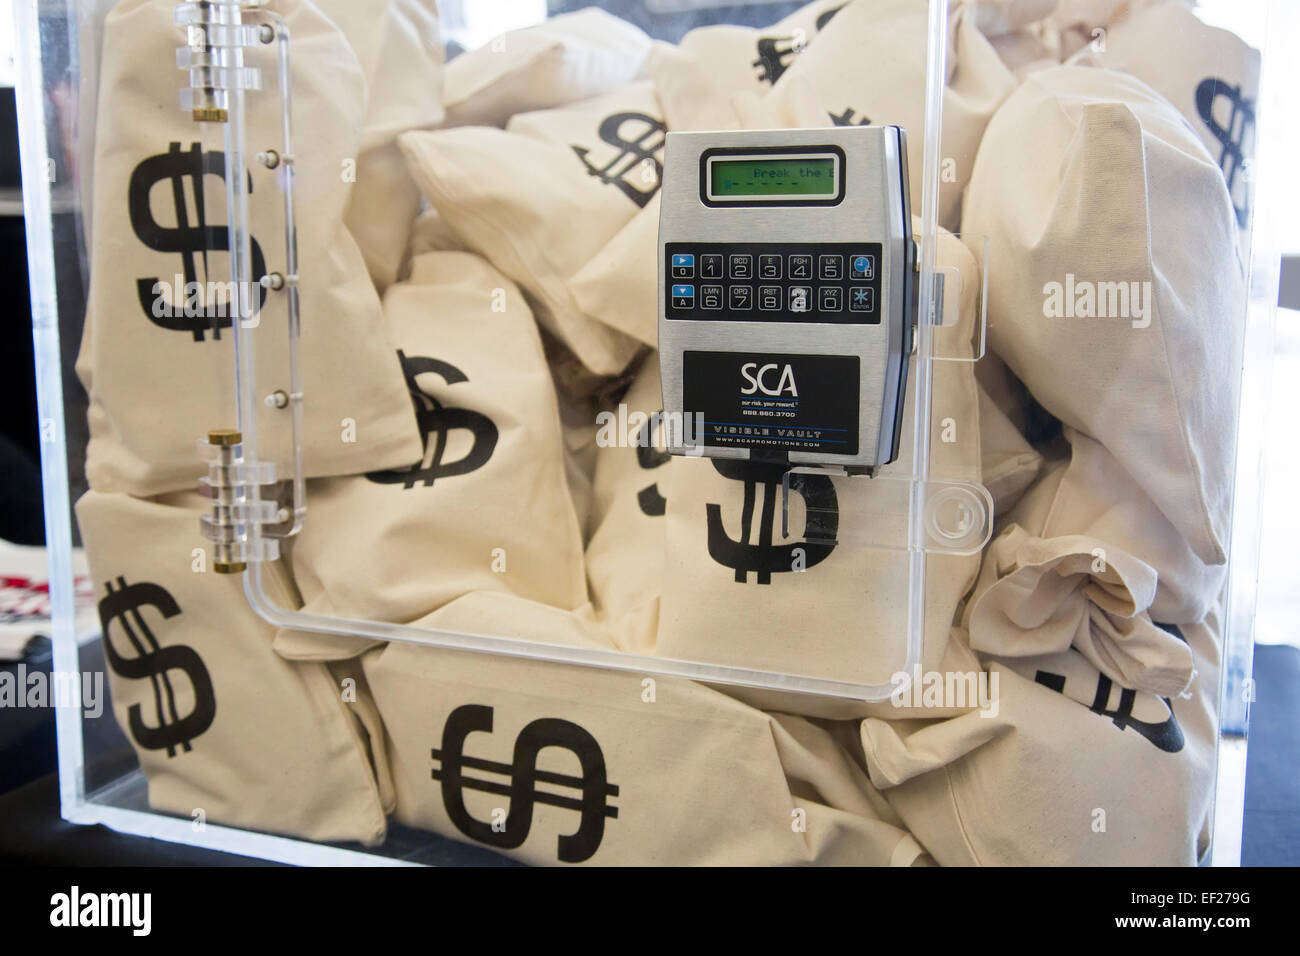 Detroit, Michigan - A radio station displayed money bags, offering $10,000 to anyone who could guess the vault's combination. Stock Photo